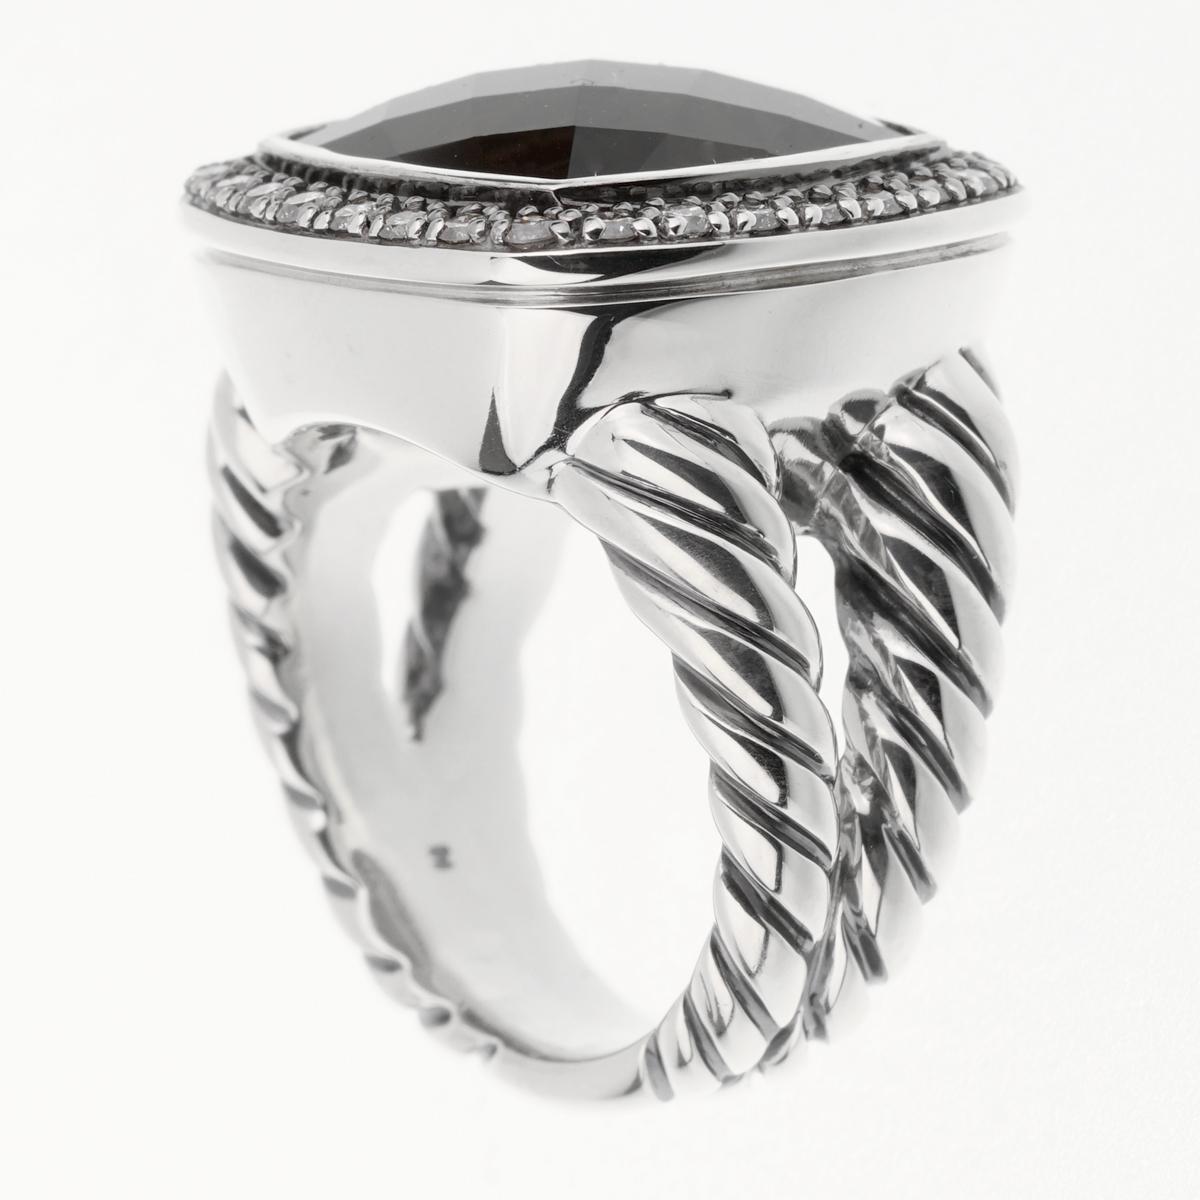 A chic David Yurman ring showcasing a large Smoky Quartz wrapped in round brilliant cut diamonds set in sterling silver.